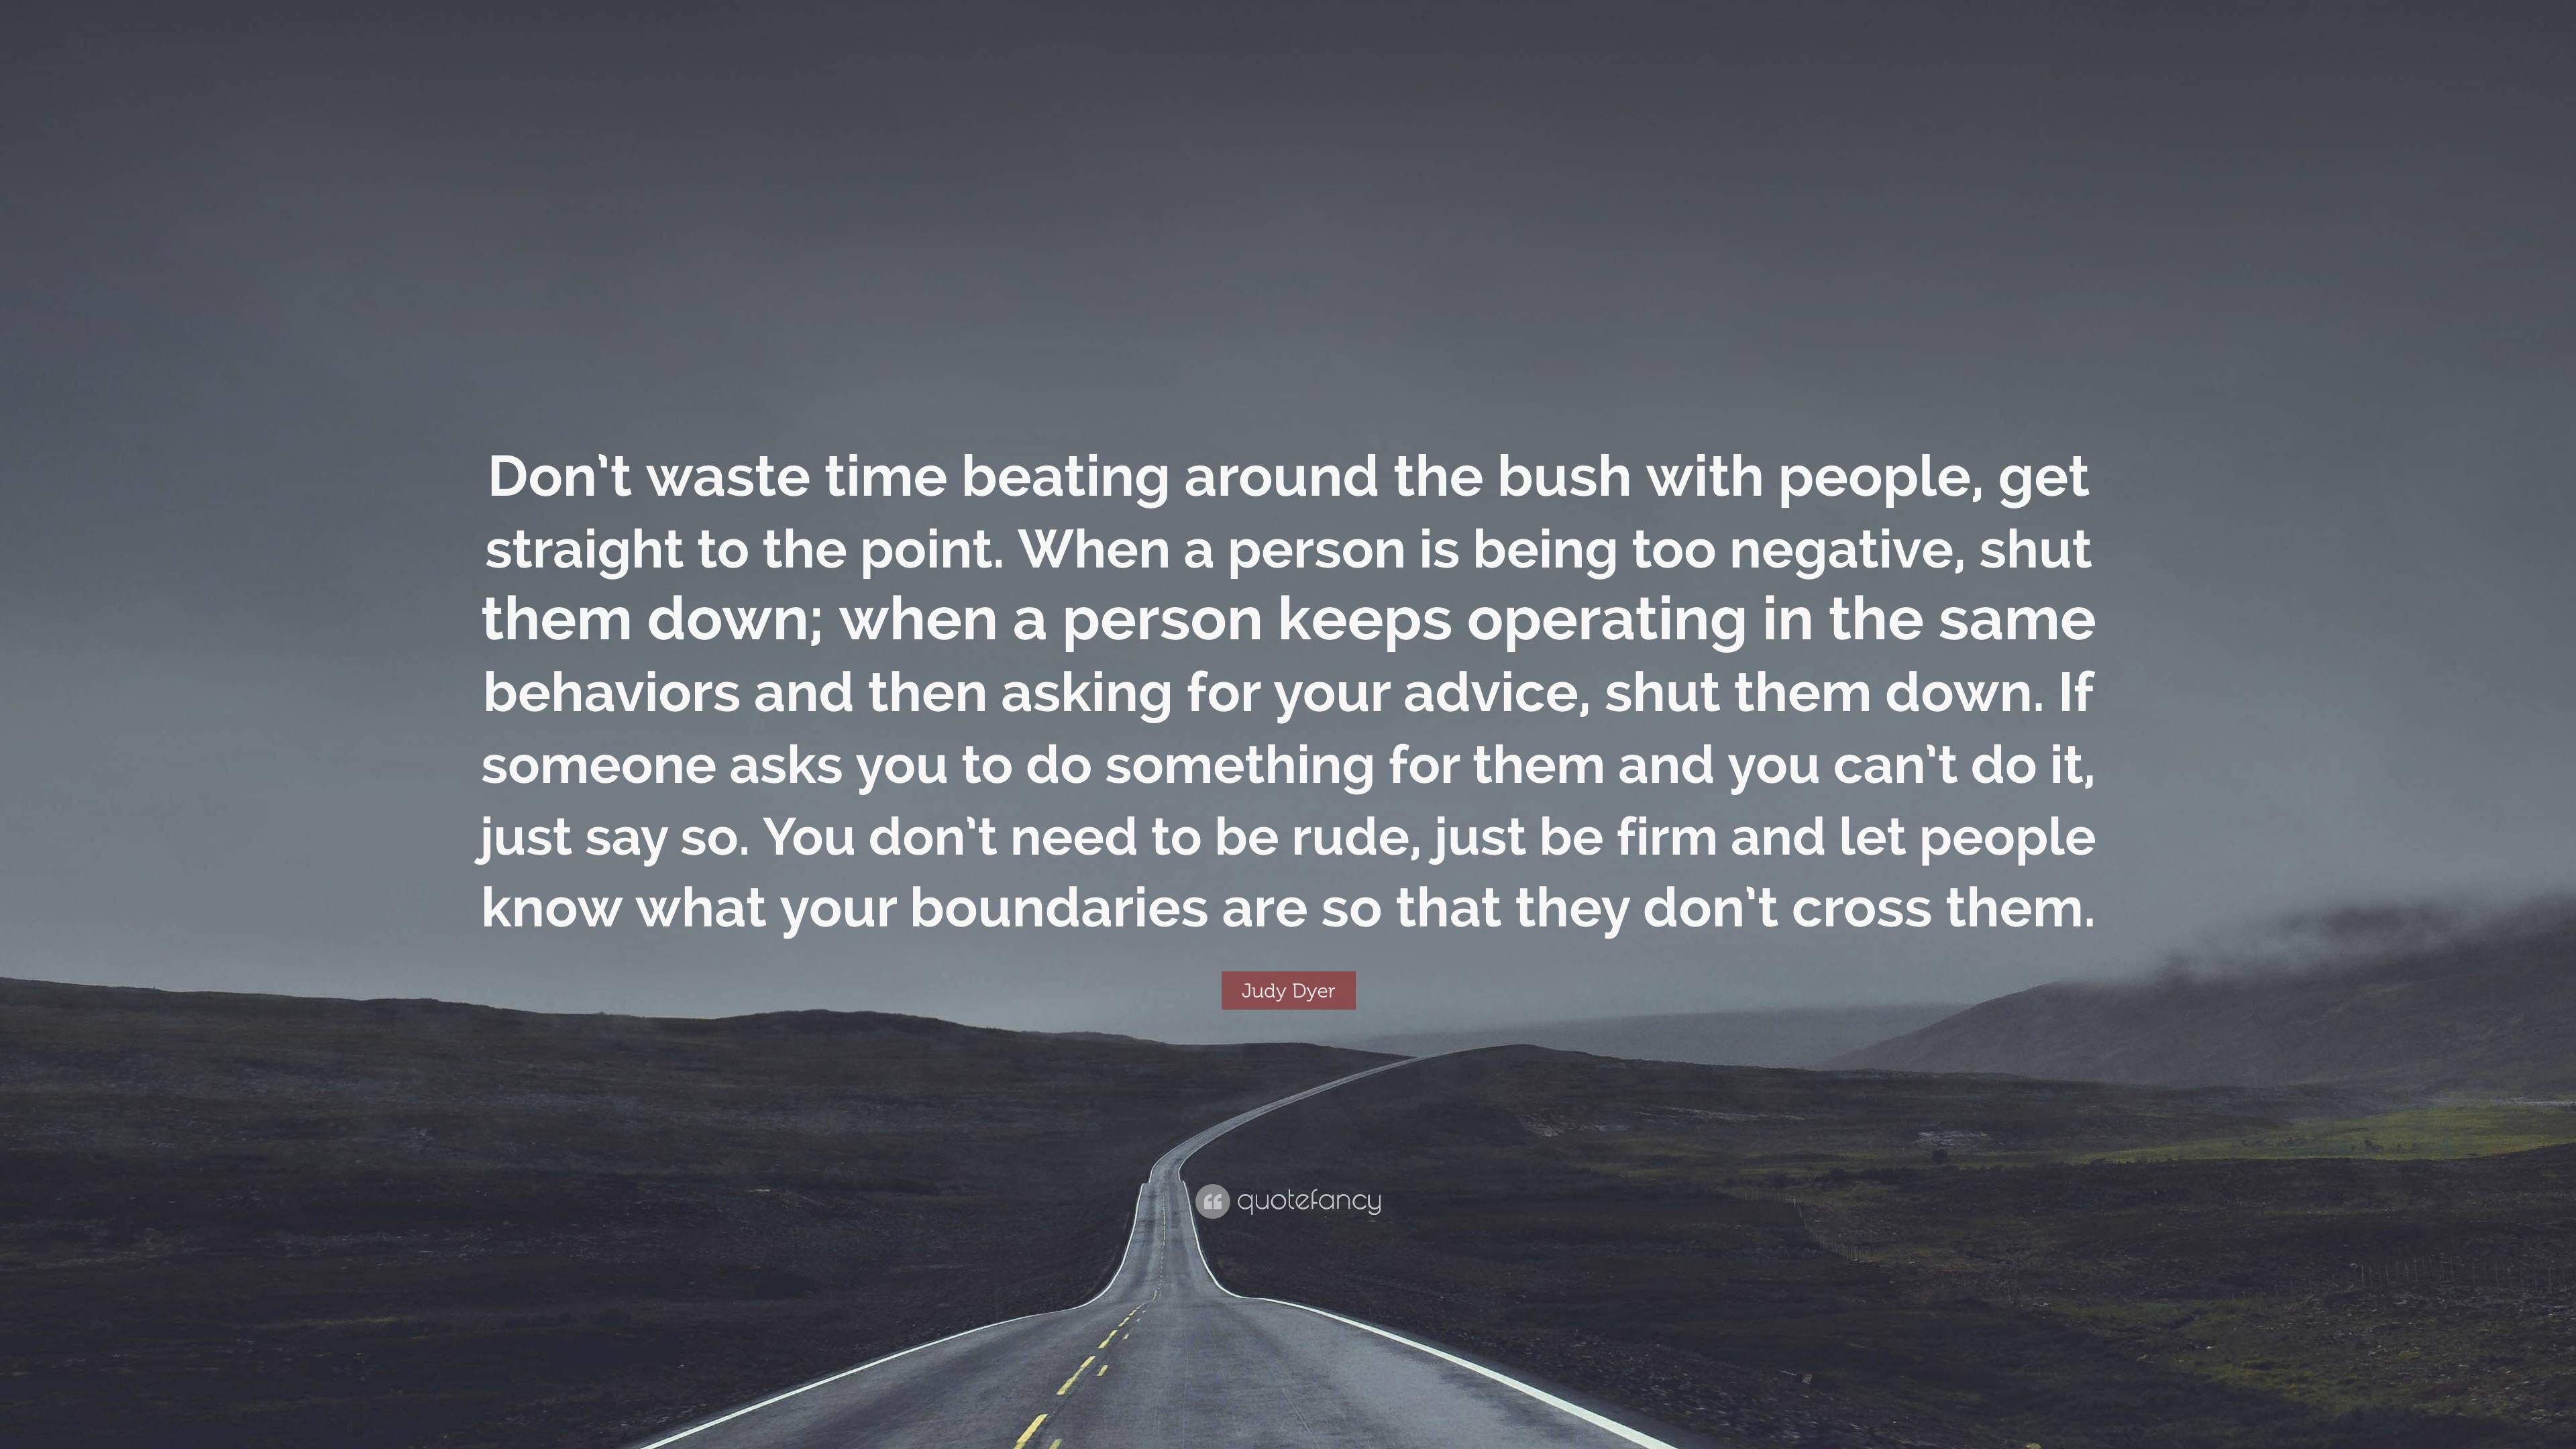 Judy Dyer Quote: “Don’t waste time beating around the bush with people ...